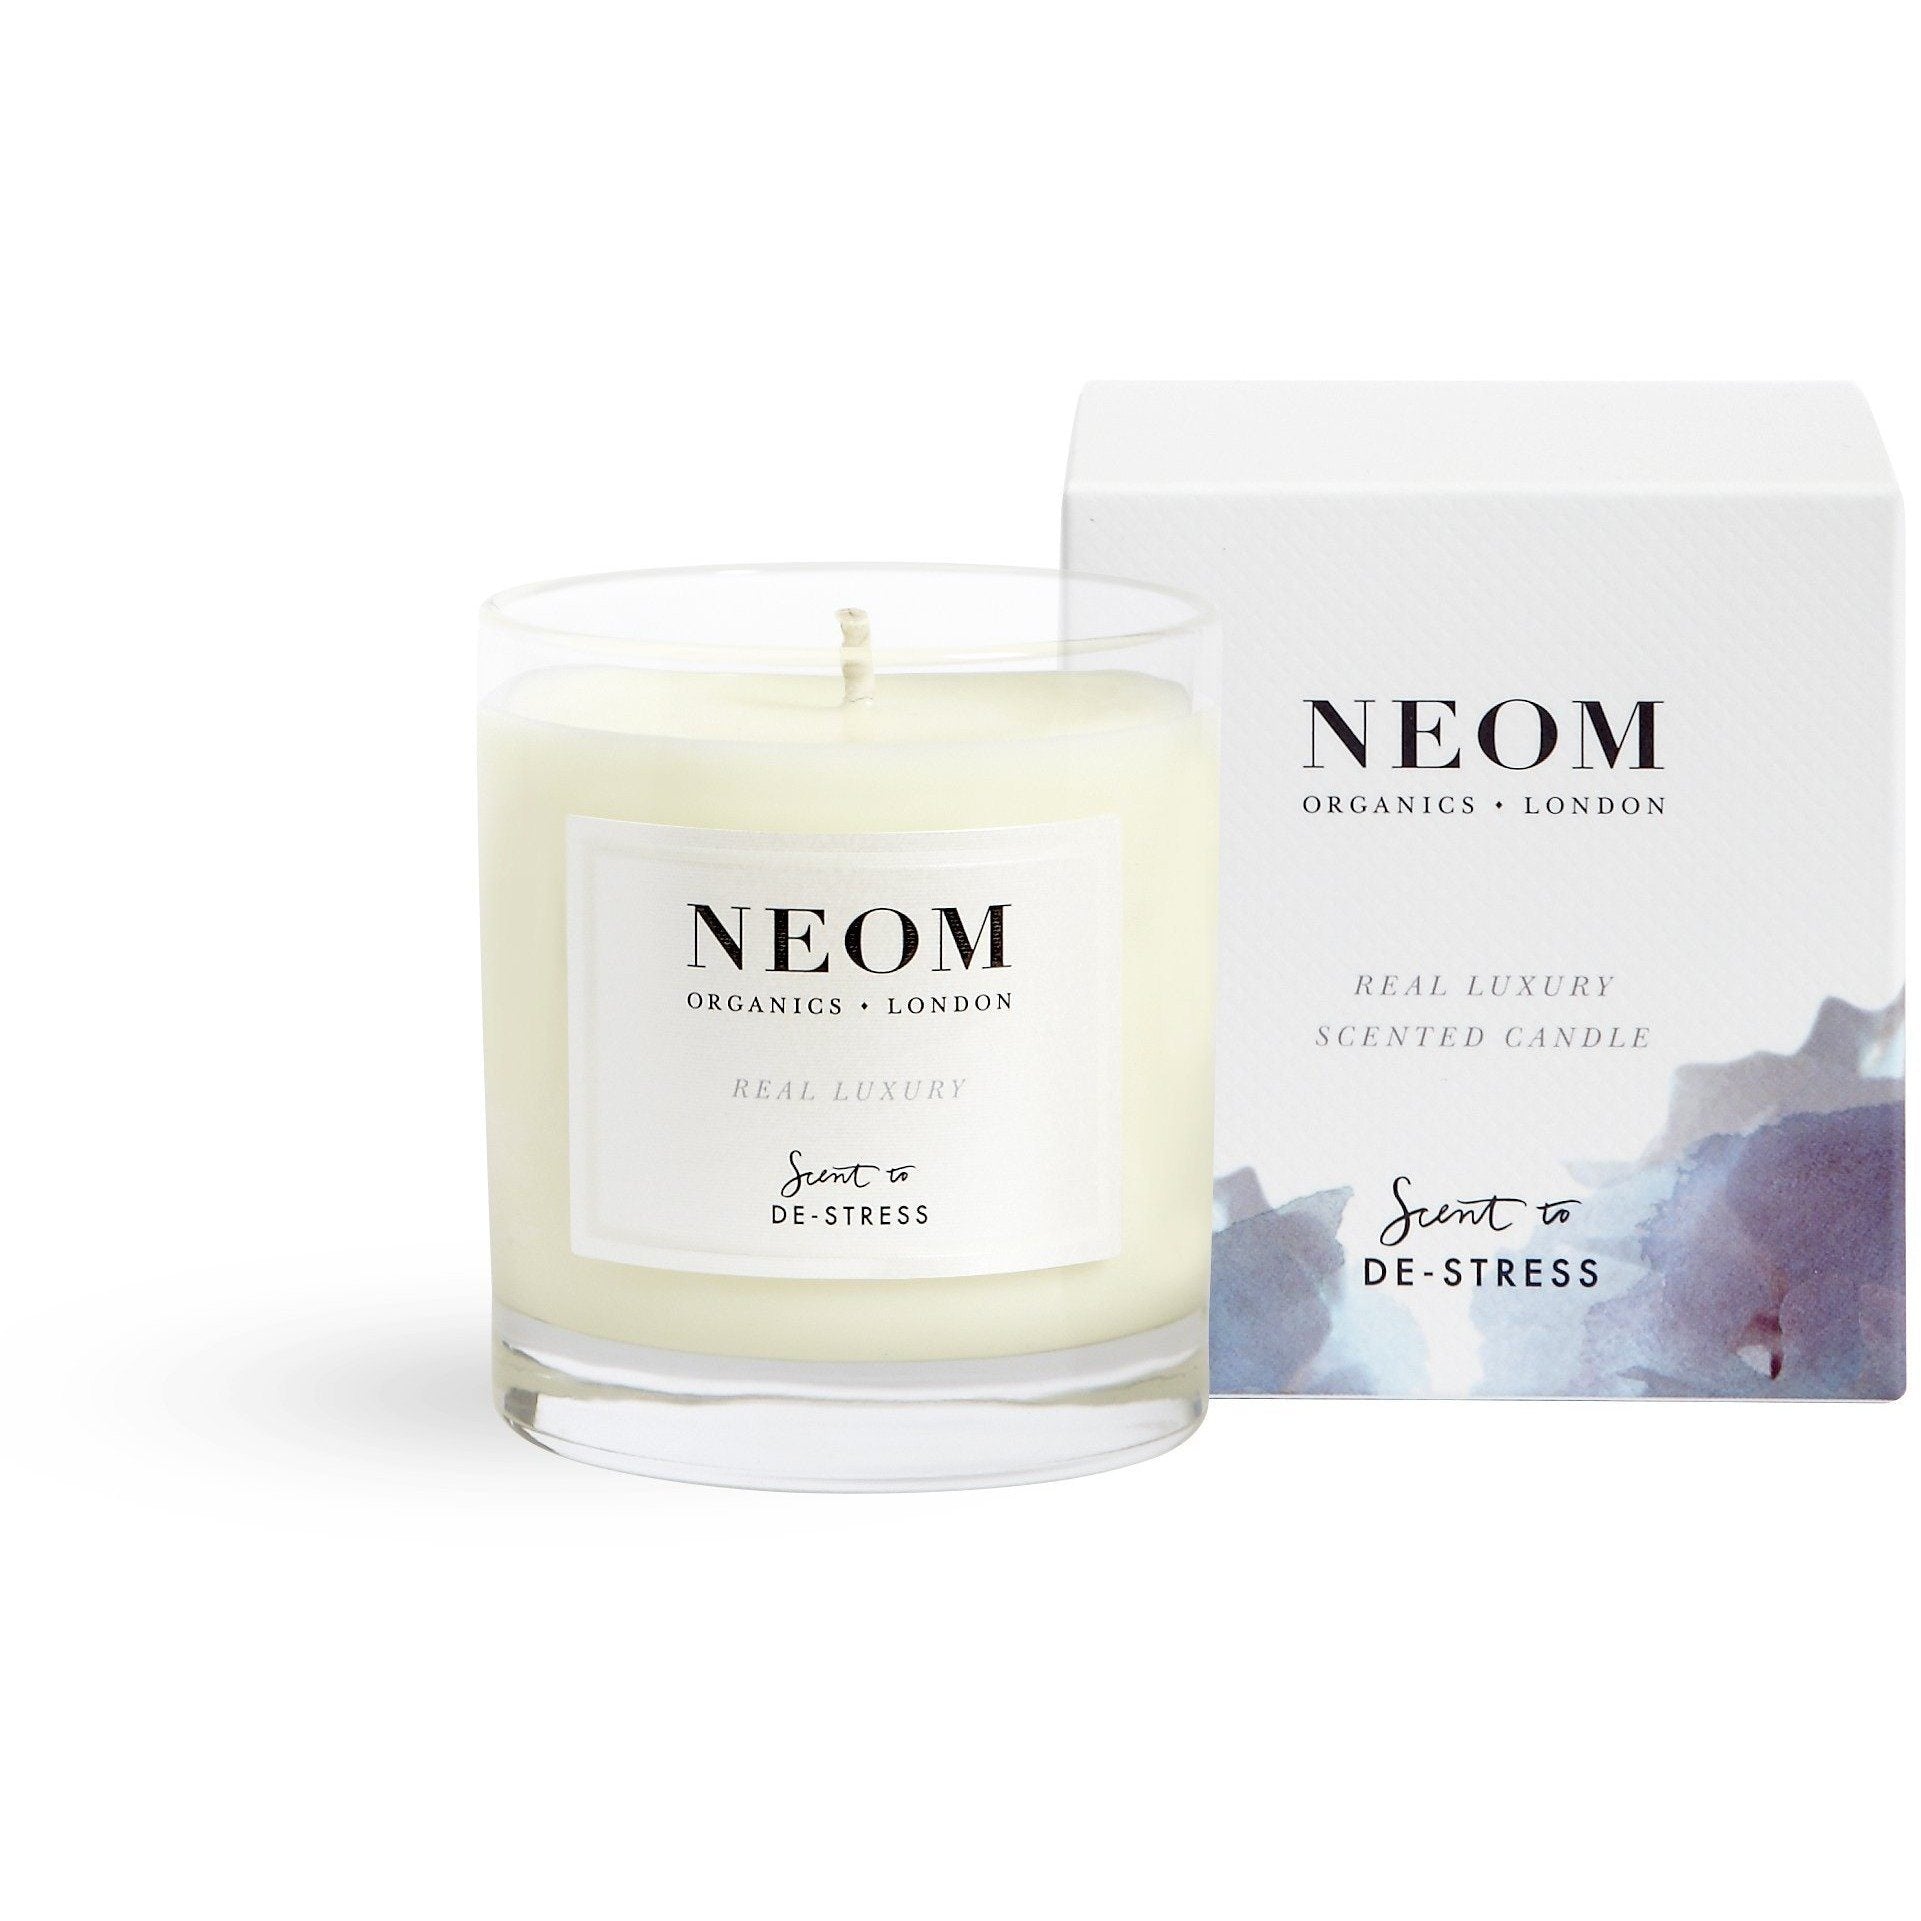 Neom Organics - Real Luxury Scented Candle (1 wick) - Kate's Kitchen